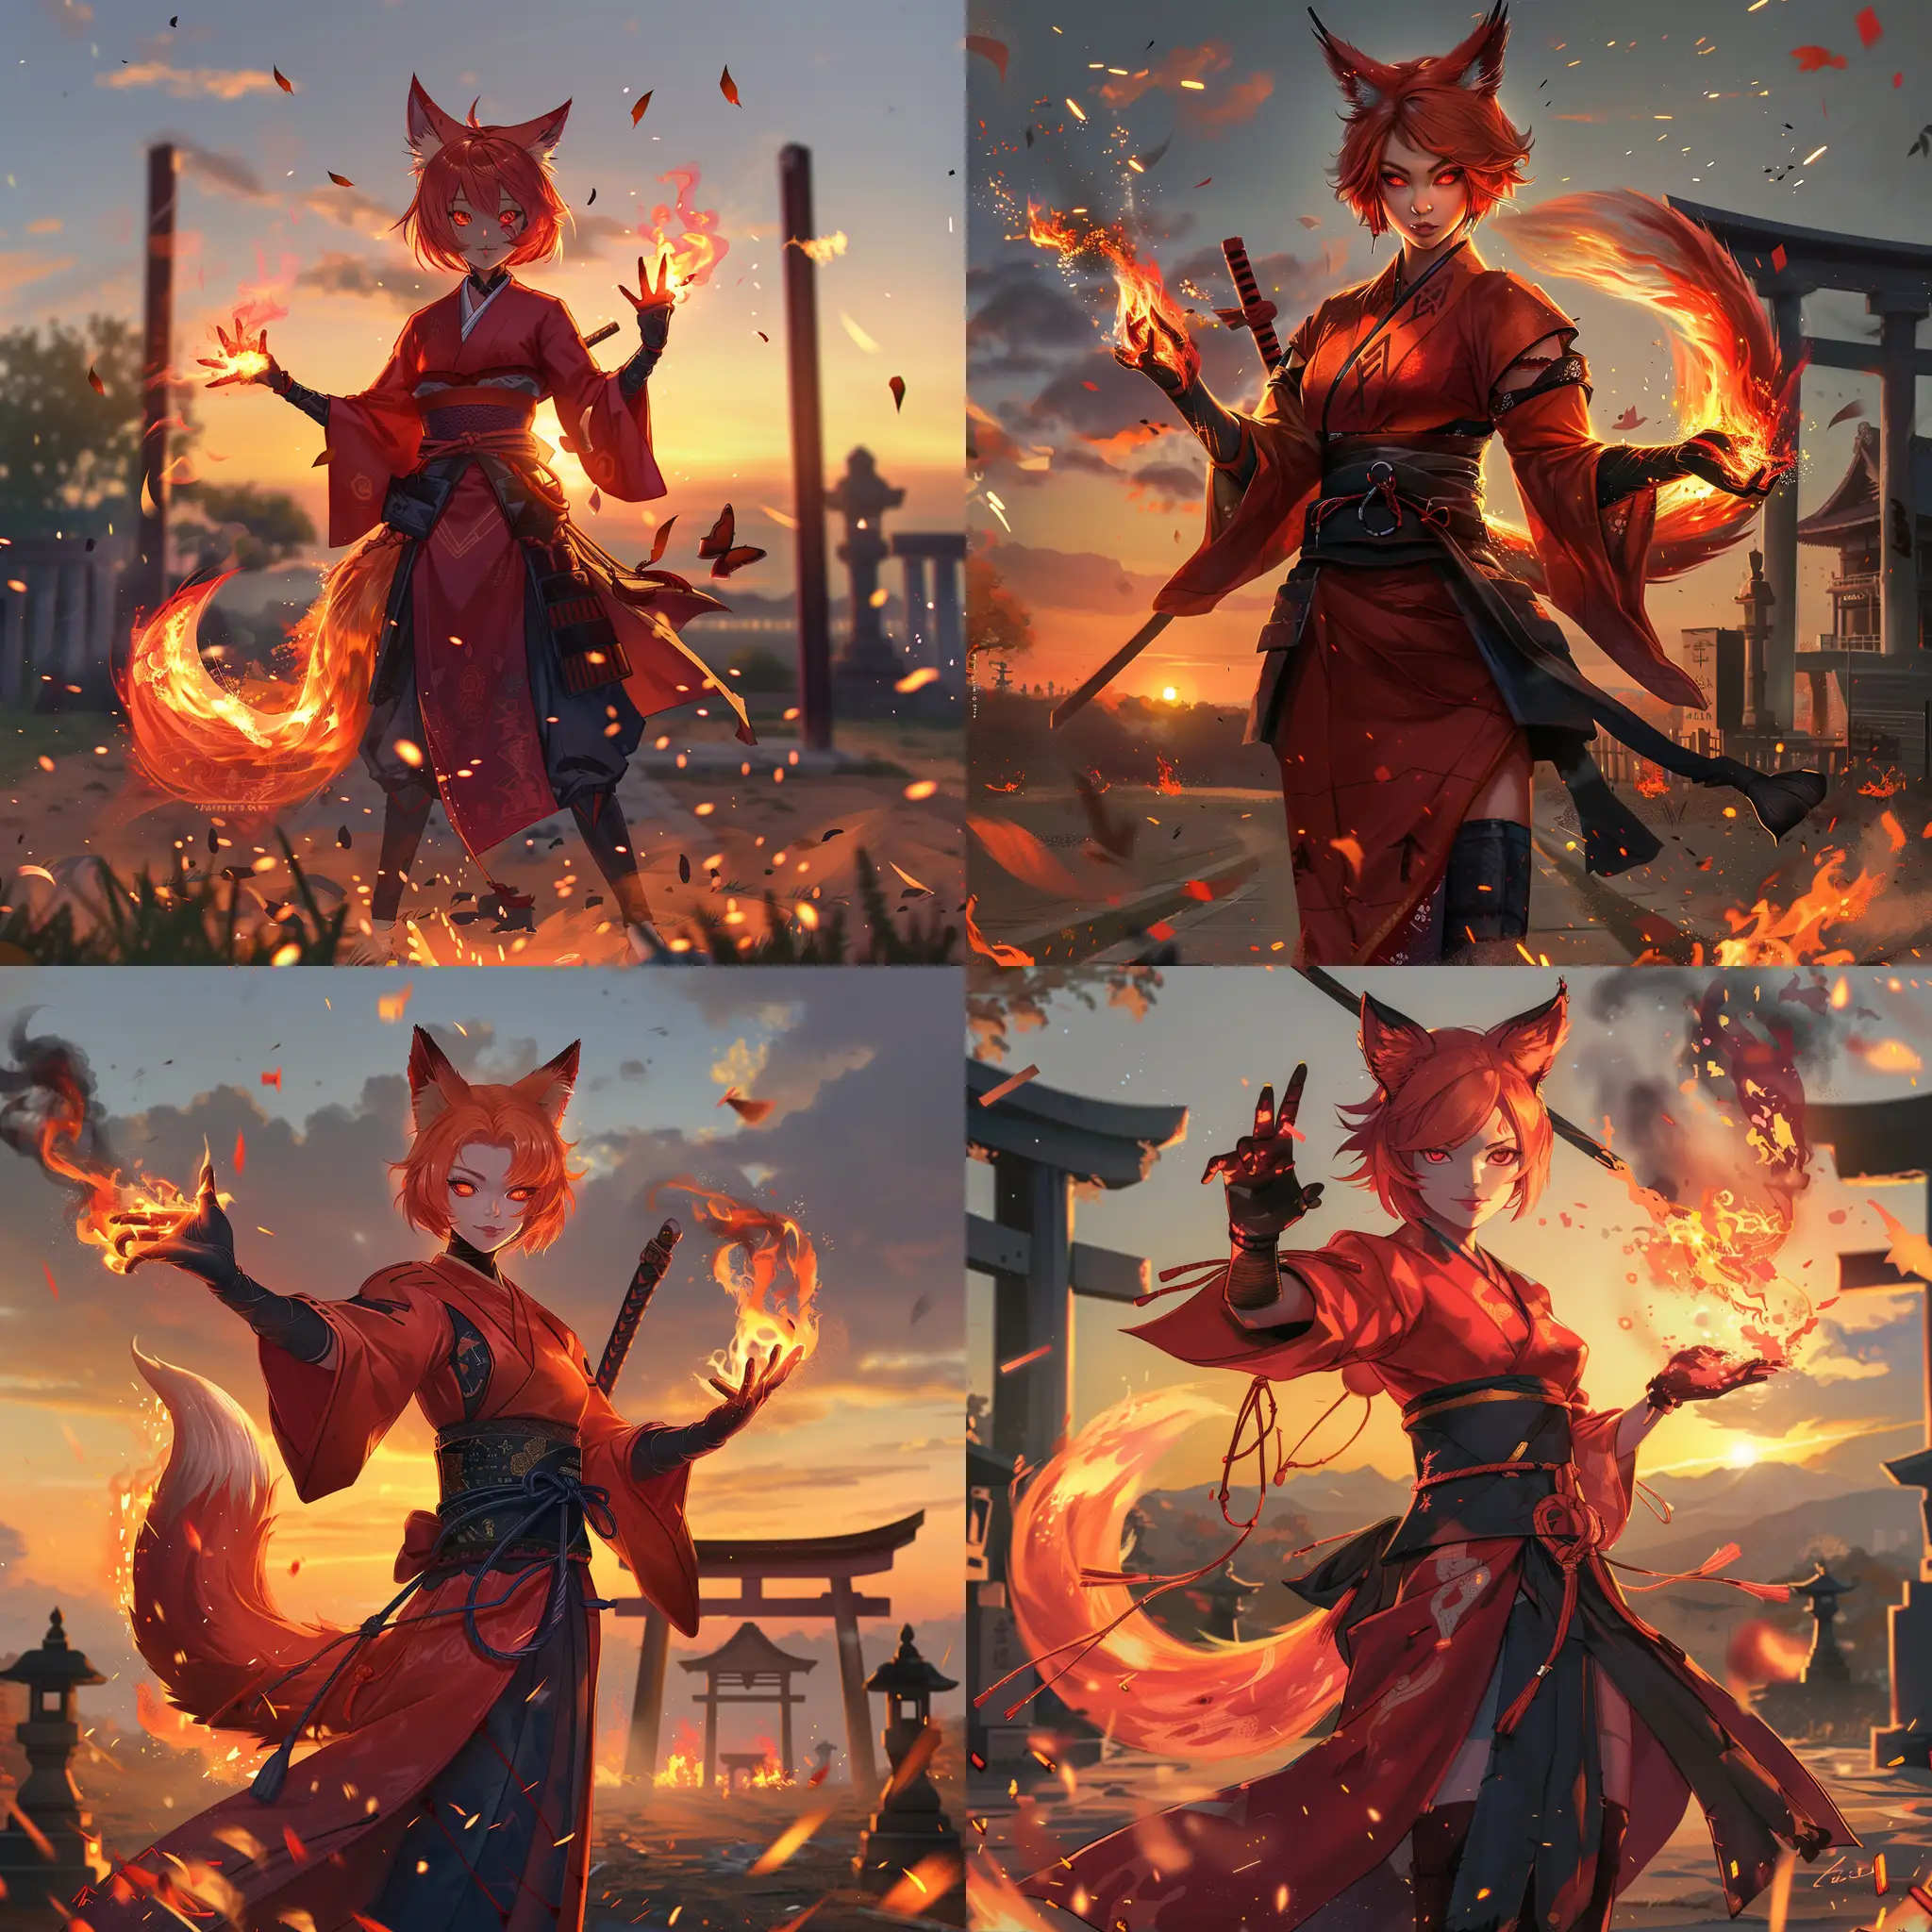 Fiery-Red-Fox-Woman-Casting-Fire-Magic-at-Shinto-Shrine